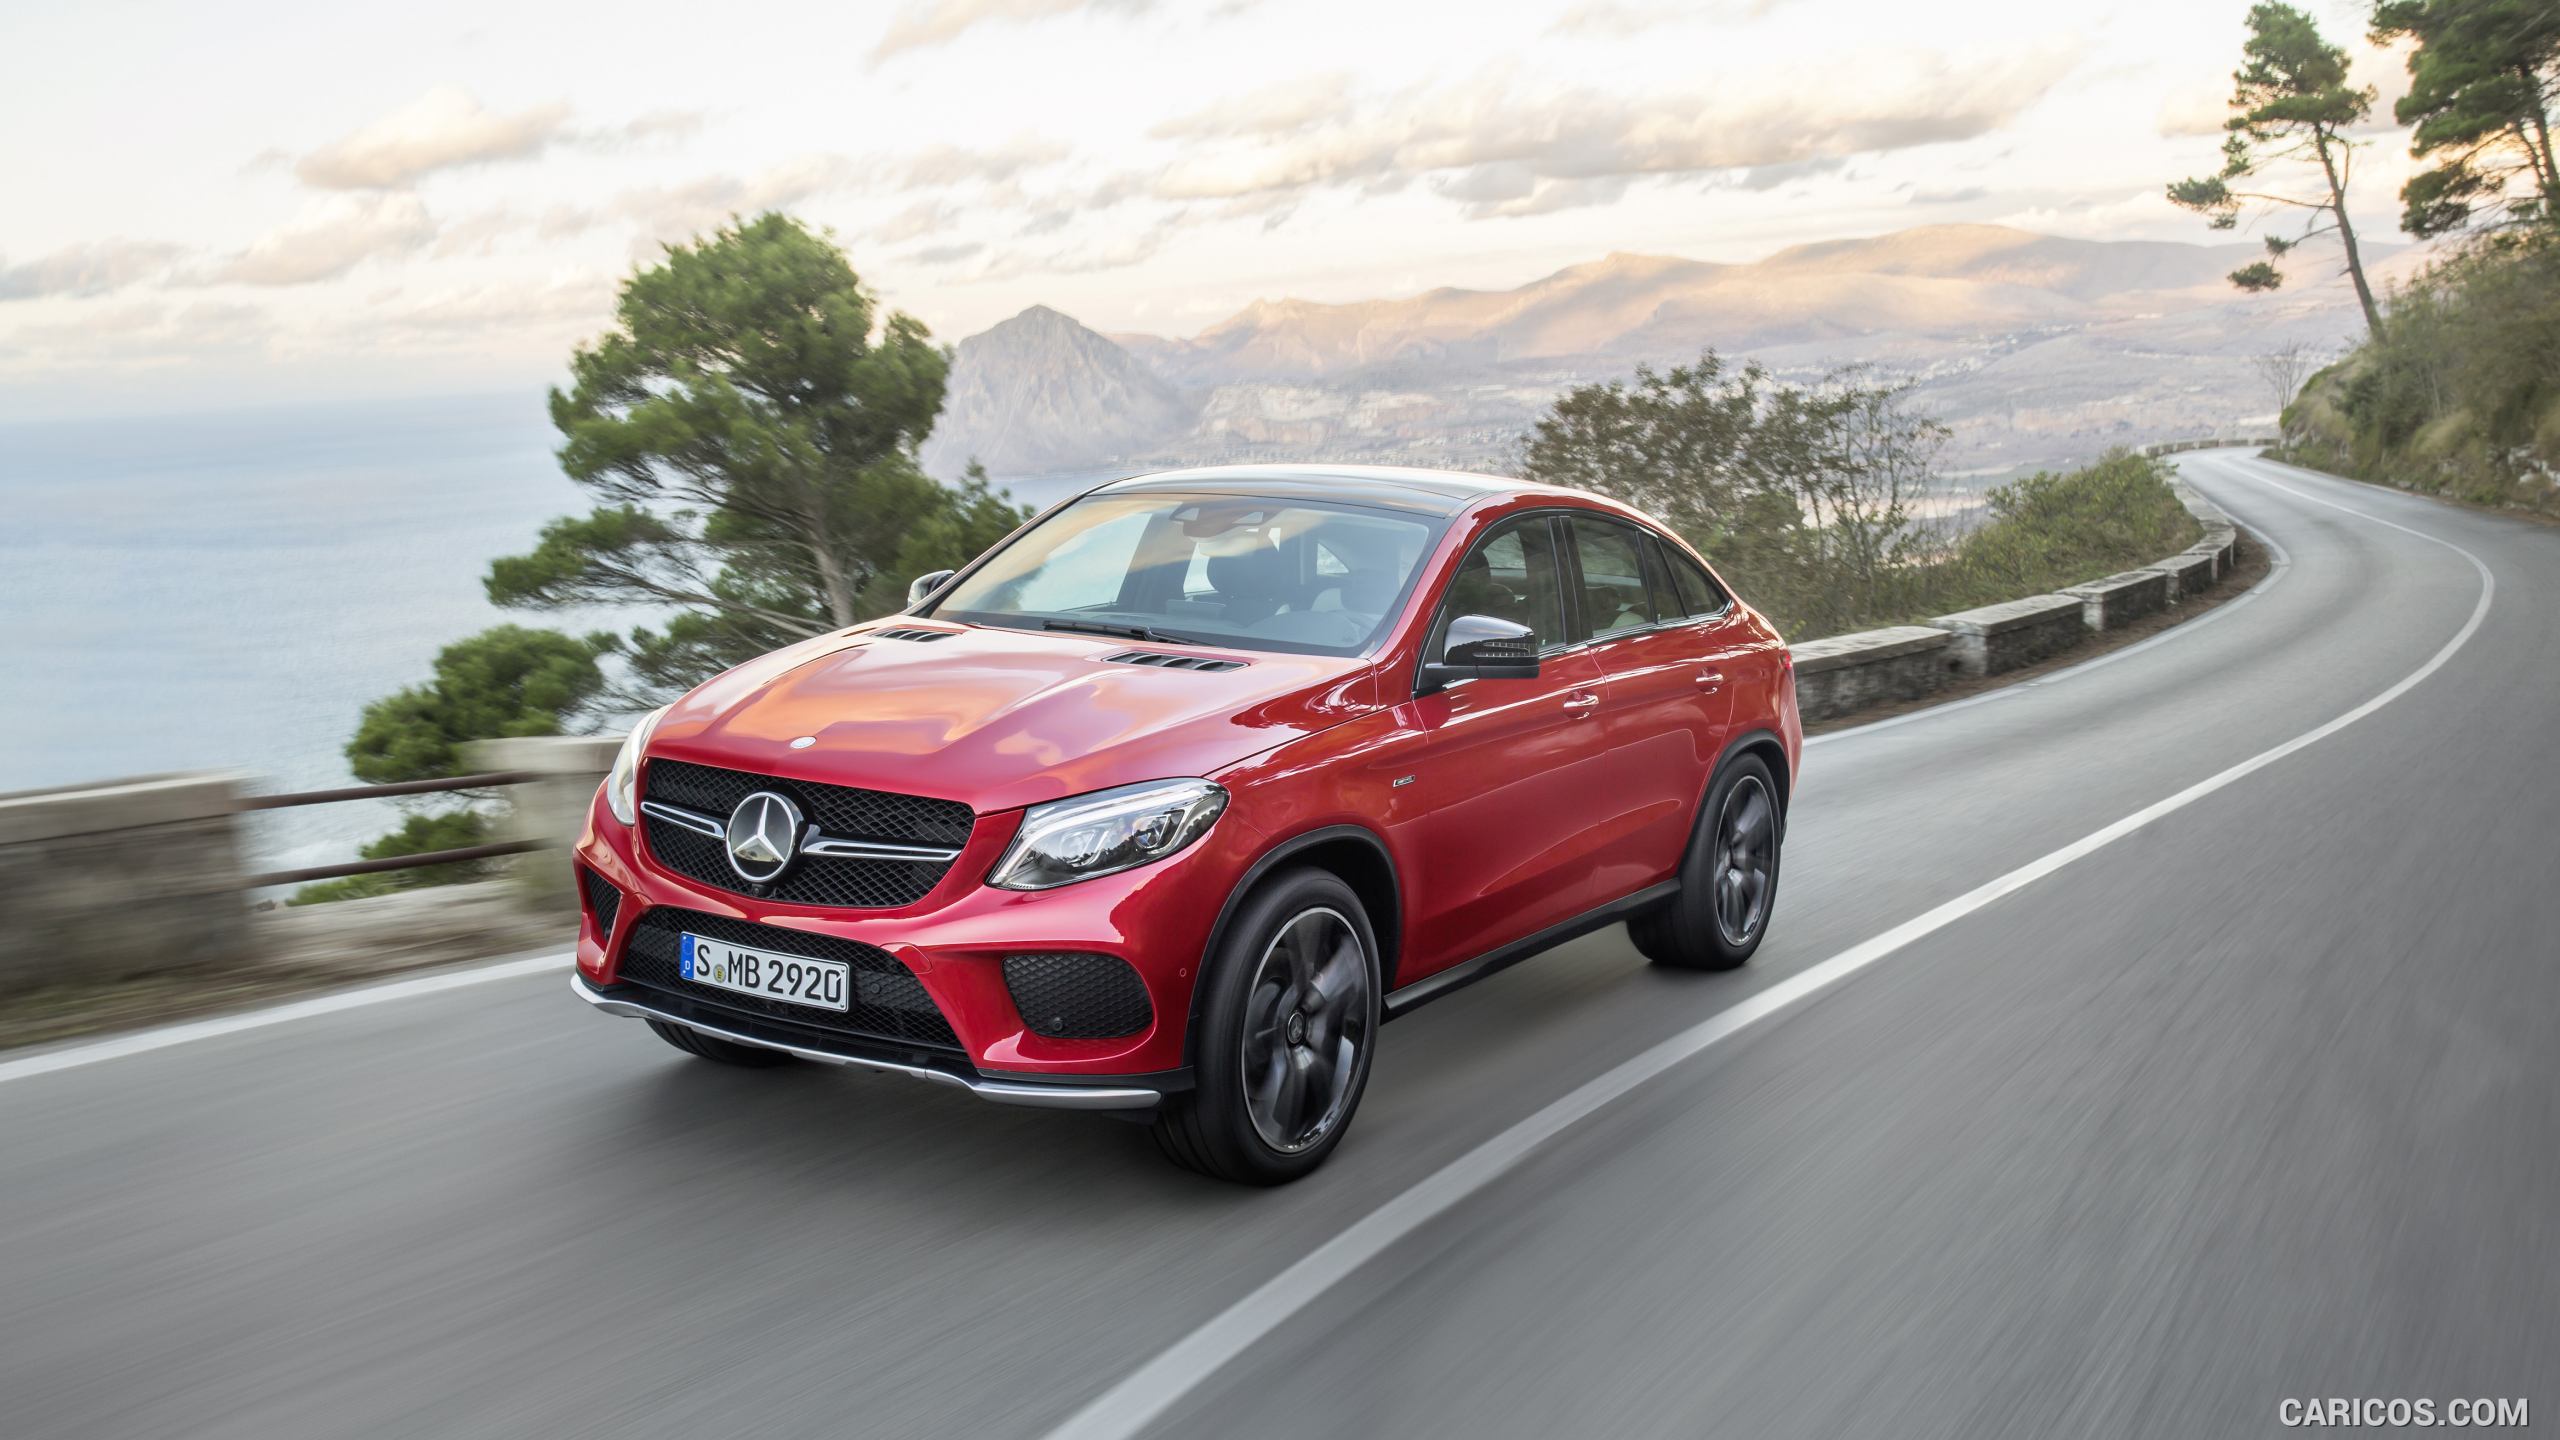 2016 Mercedes-Benz GLE 450 AMG Coupe 4MATIC (Designo Hyacinth Red Metallic) - Front, #14 of 115